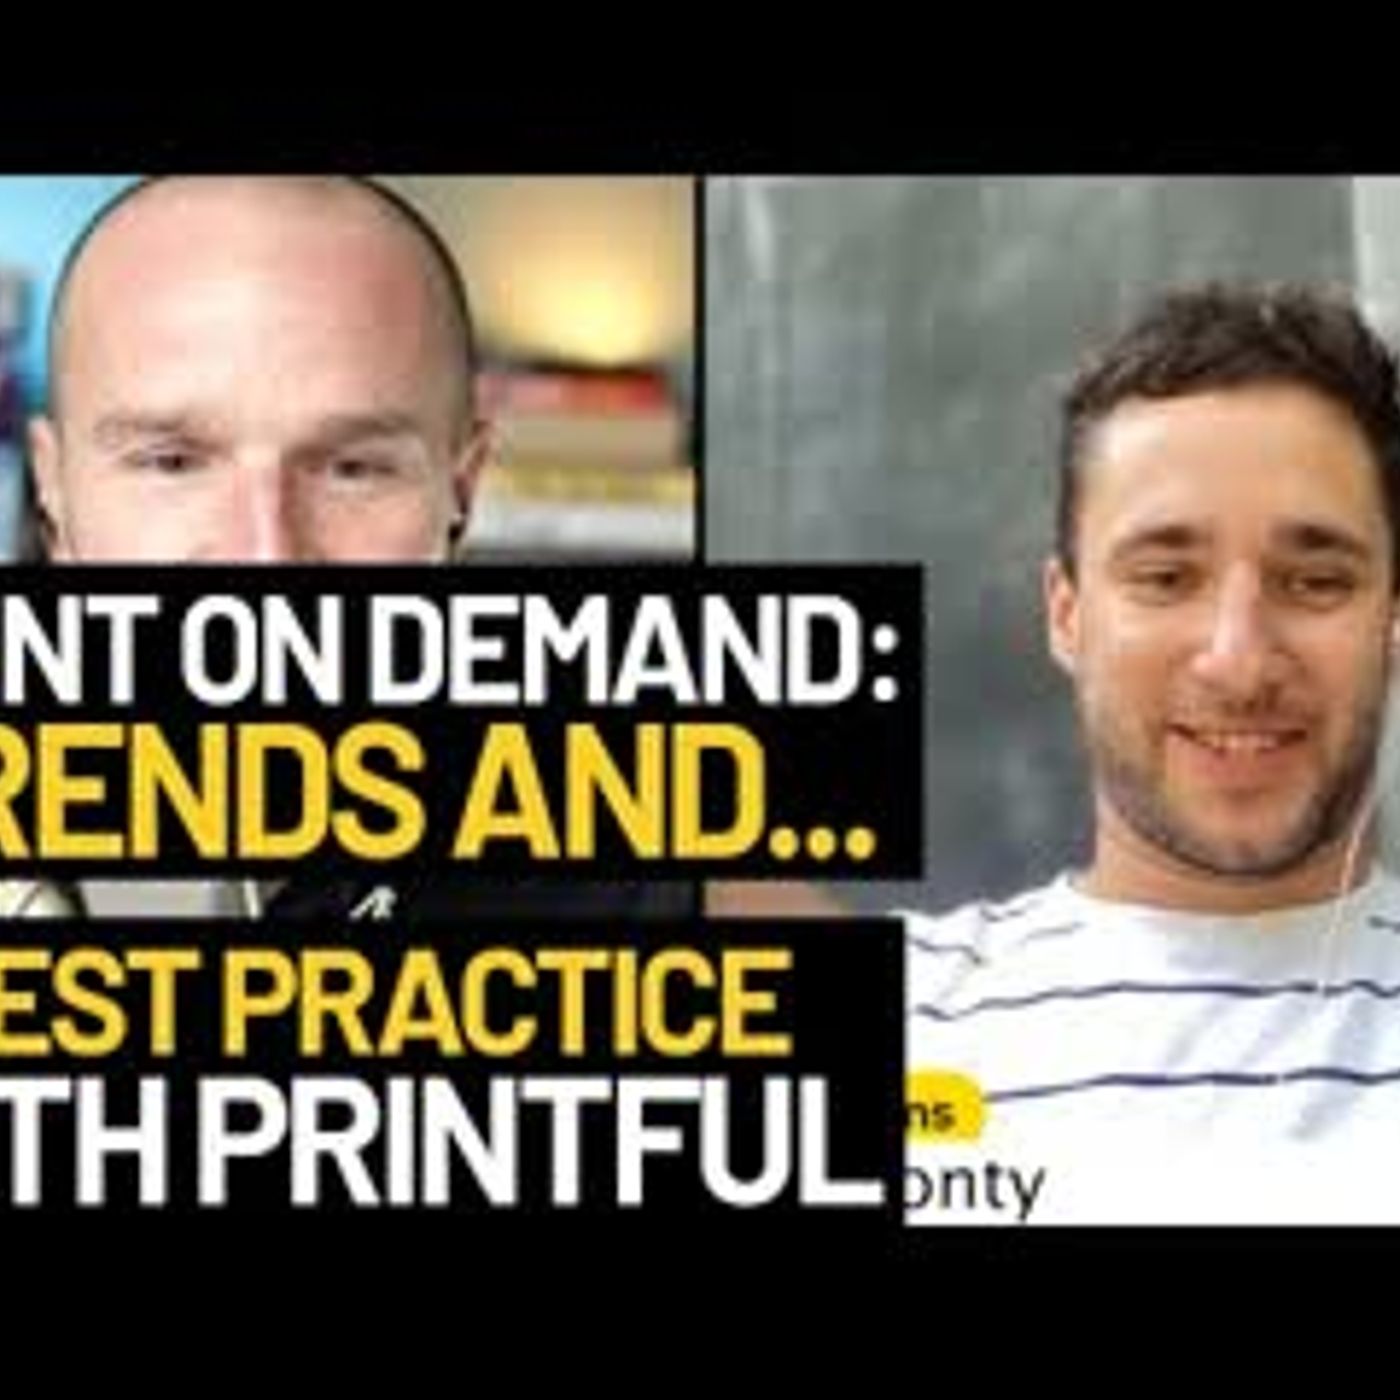 Print on demand trends and best practice with Printful